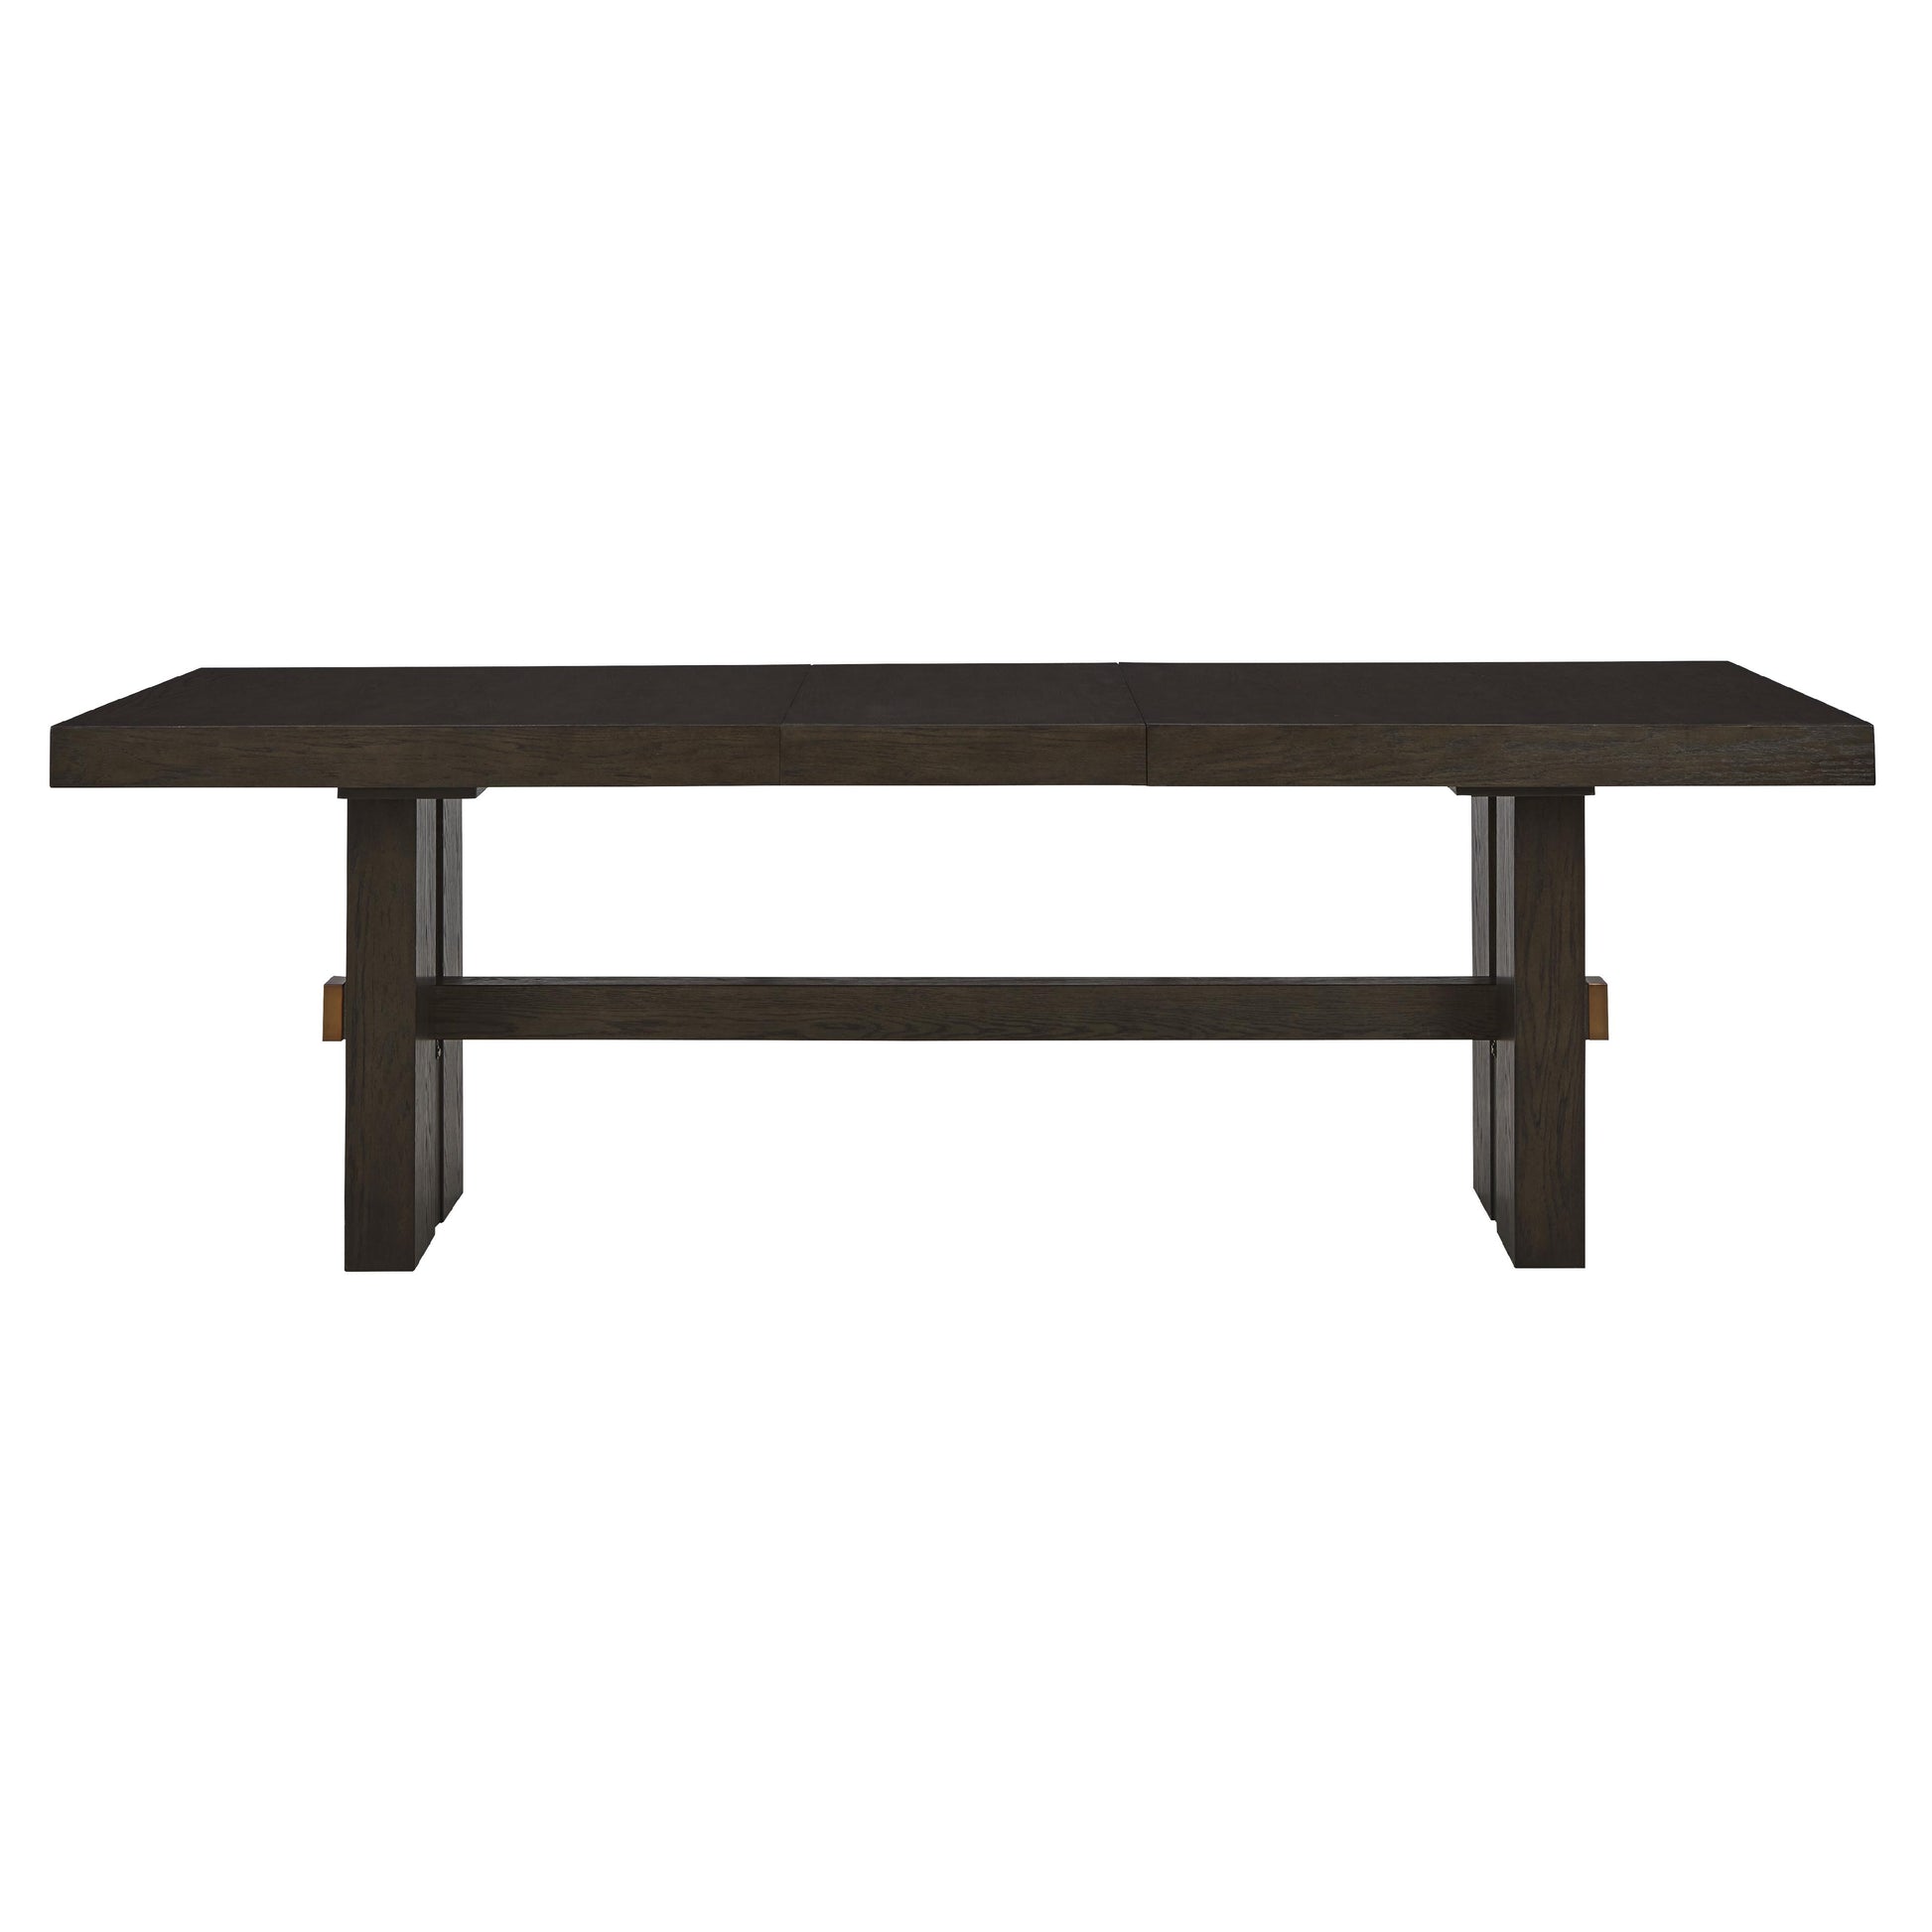 Signature Design by Ashley Burkhaus Dining Table with Trestle Base D984-45